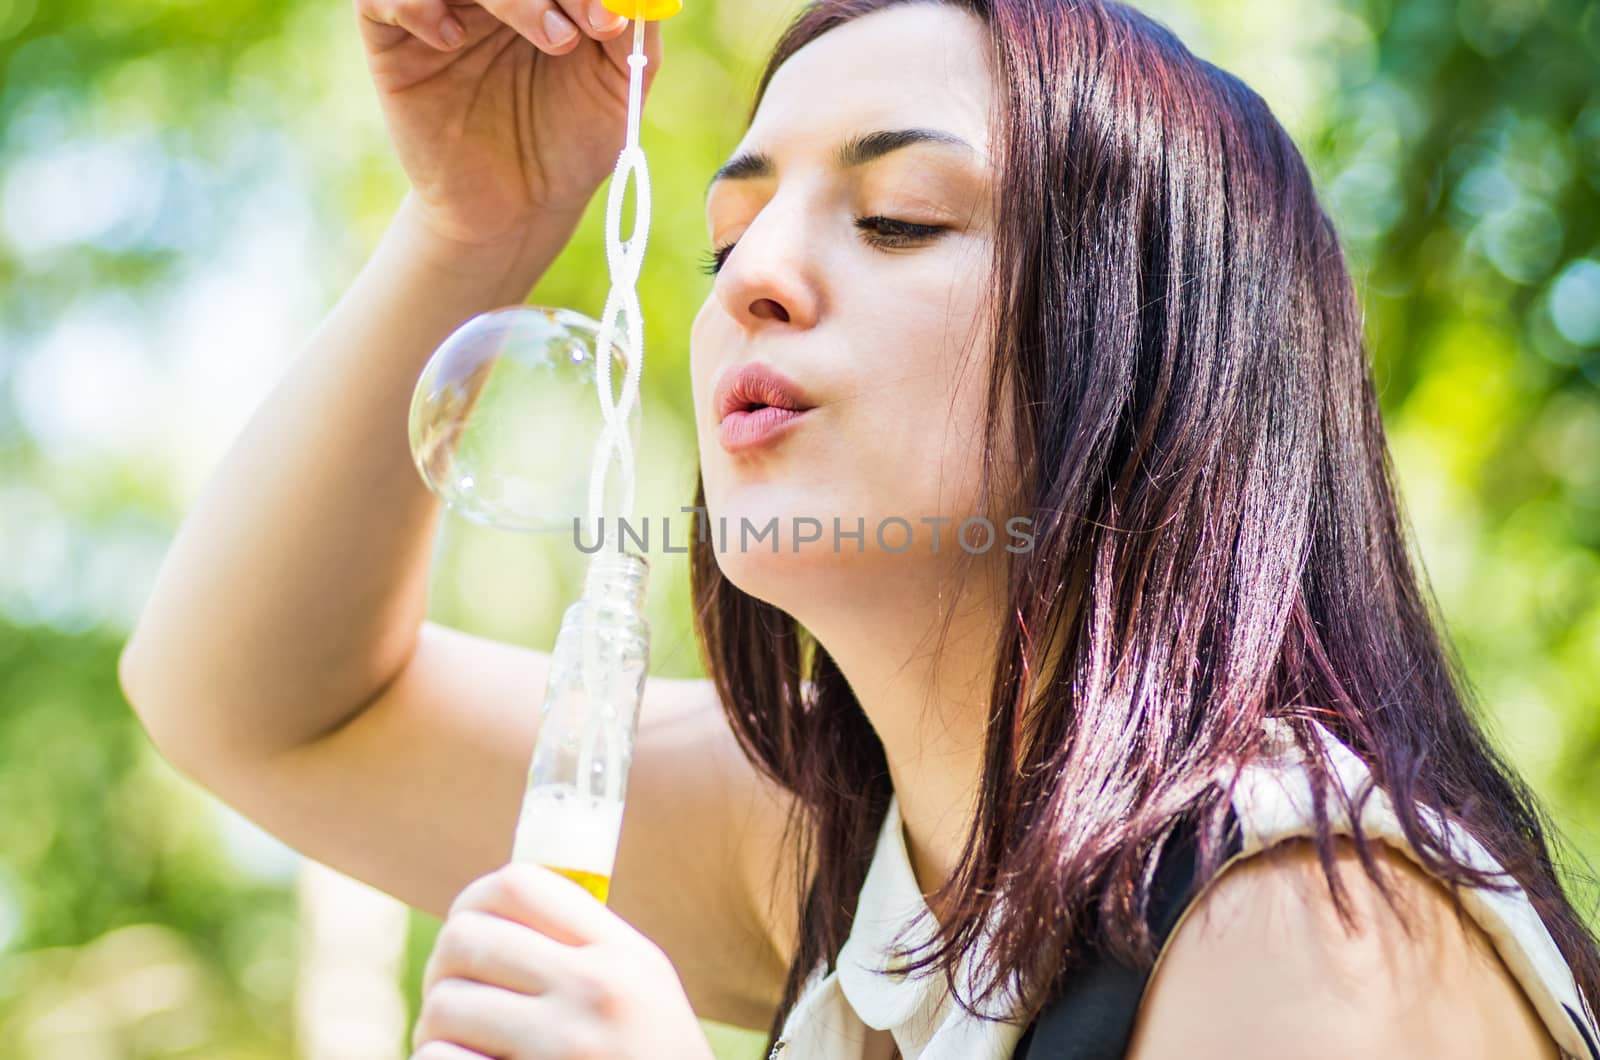 young woman blowing soap bubbles in the park